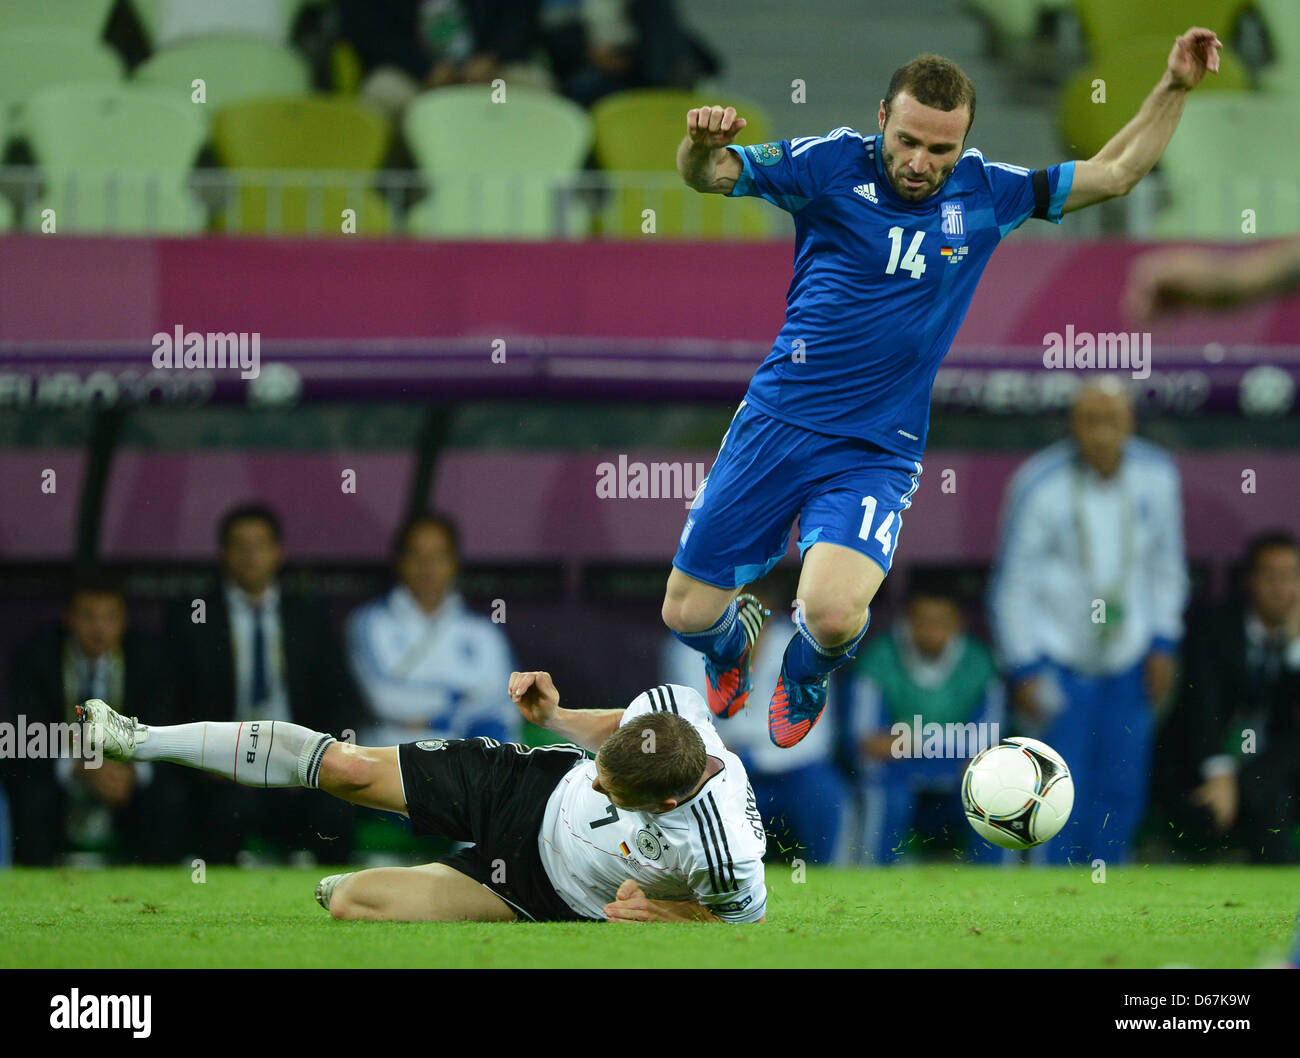 Germany's Bastian Schweinsteiger (L) and Greece's Dimitris Salpingidis vie for the ball during UEFA EURO 2012 quarter-final soccer match Germany vs Greece at Arena Gdansk in Gdansk, Poland, 22 June 2012. Photo: Marcus Brandt dpa (Please refer to chapters 7 and 8 of http://dpaq.de/Ziovh for UEFA Euro 2012 Terms & Conditions)  +++(c) dpa - Bildfunk+++ Stock Photo